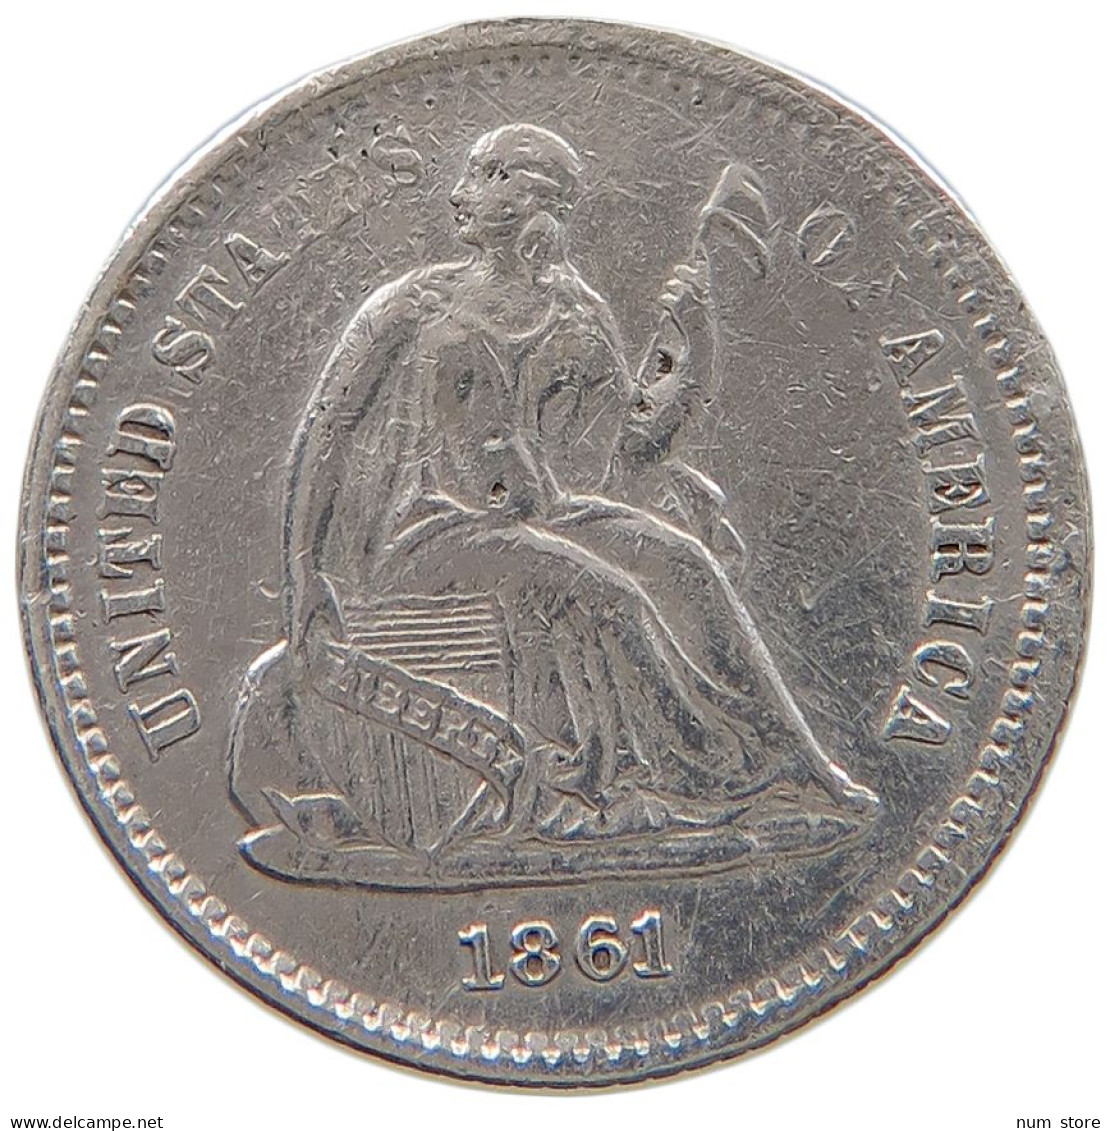 UNITED STATES OF AMERICA HALF DIME 1861 SEATED LIBERTY ENGRAVED #t156 0521 - Half Dime